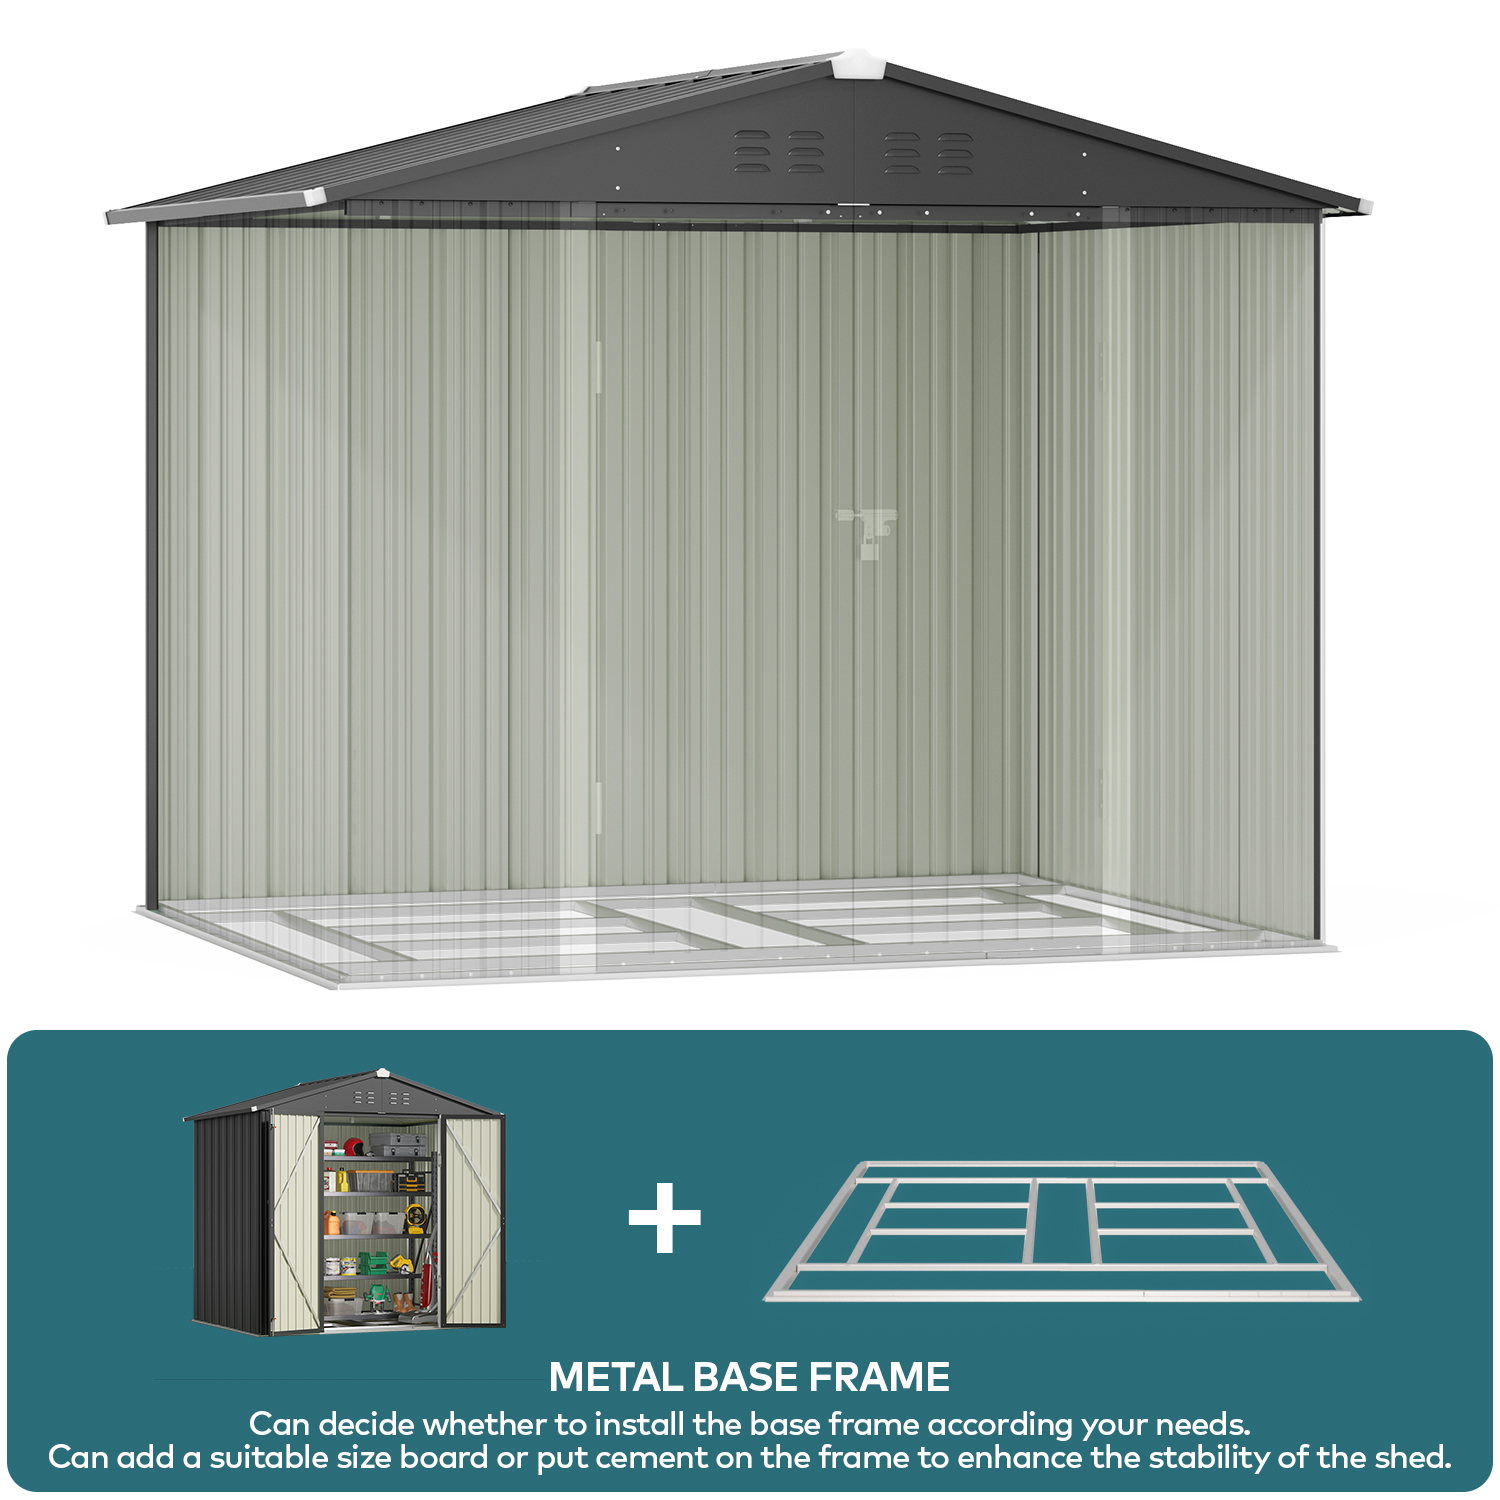 Lofka 8 x 6 FT Metal  Outdoor Storage Shed with Double Lockable Doors and Air Vents for Patio, Garden, Backyard, Lawn, Dark Gray - image 4 of 7